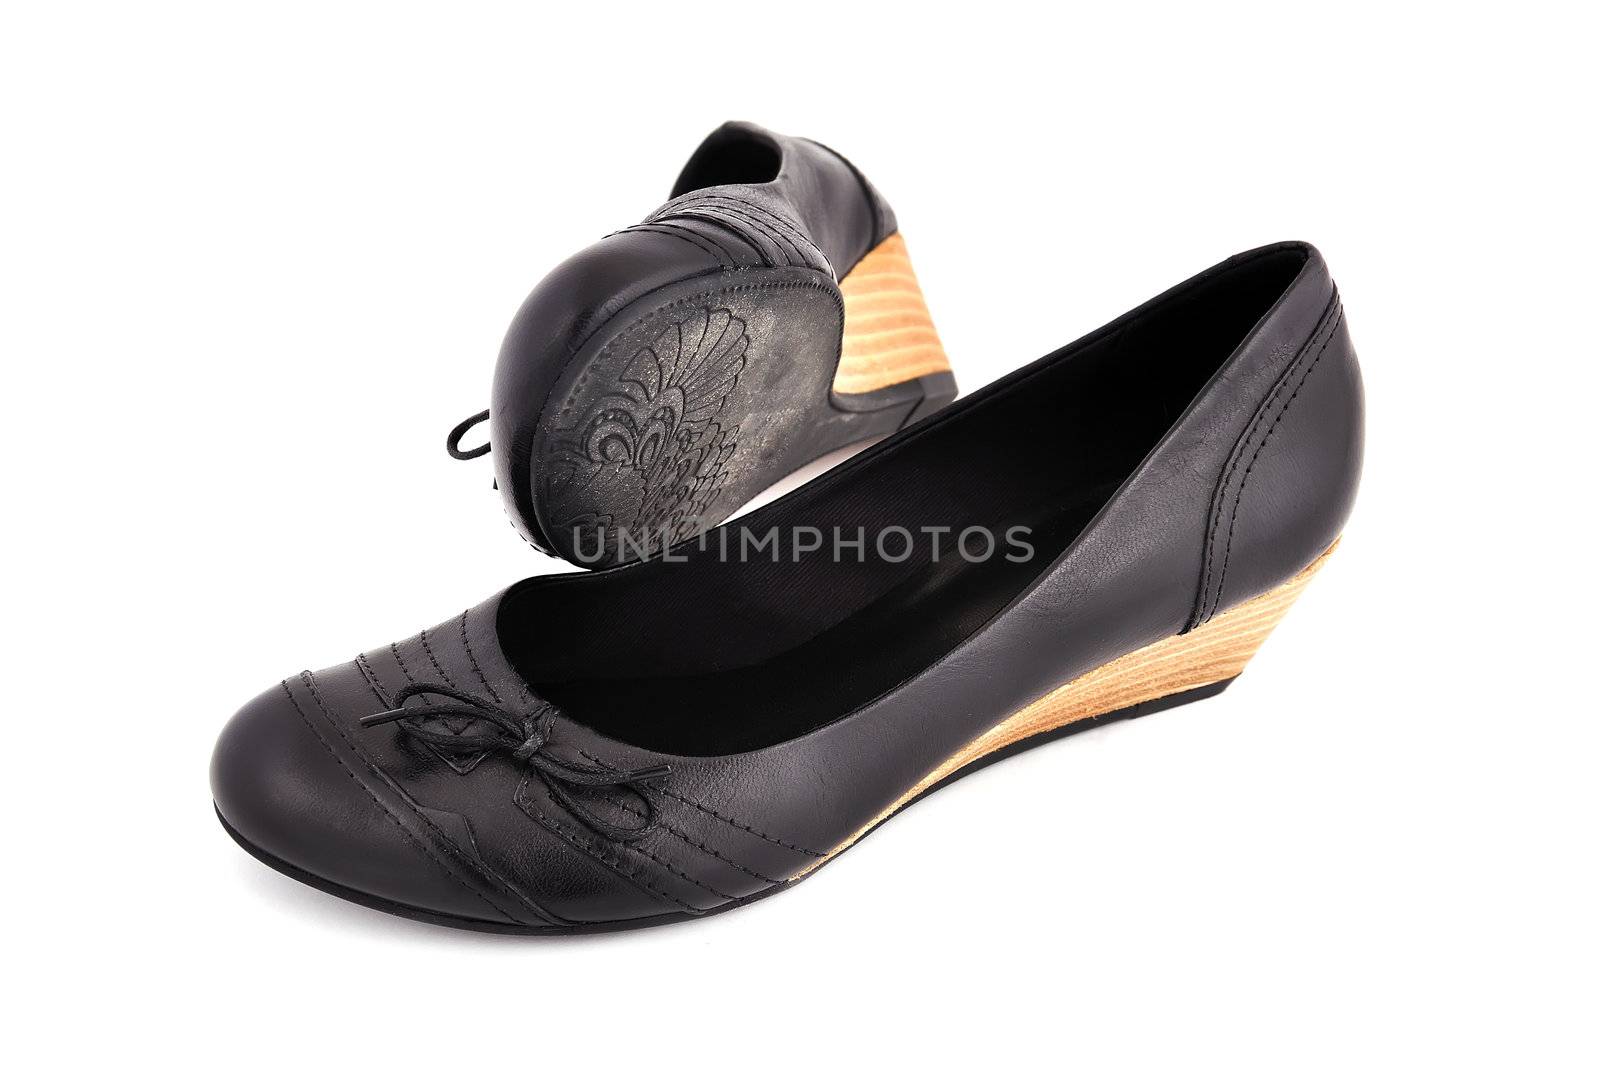 black ladies shoes on a white background